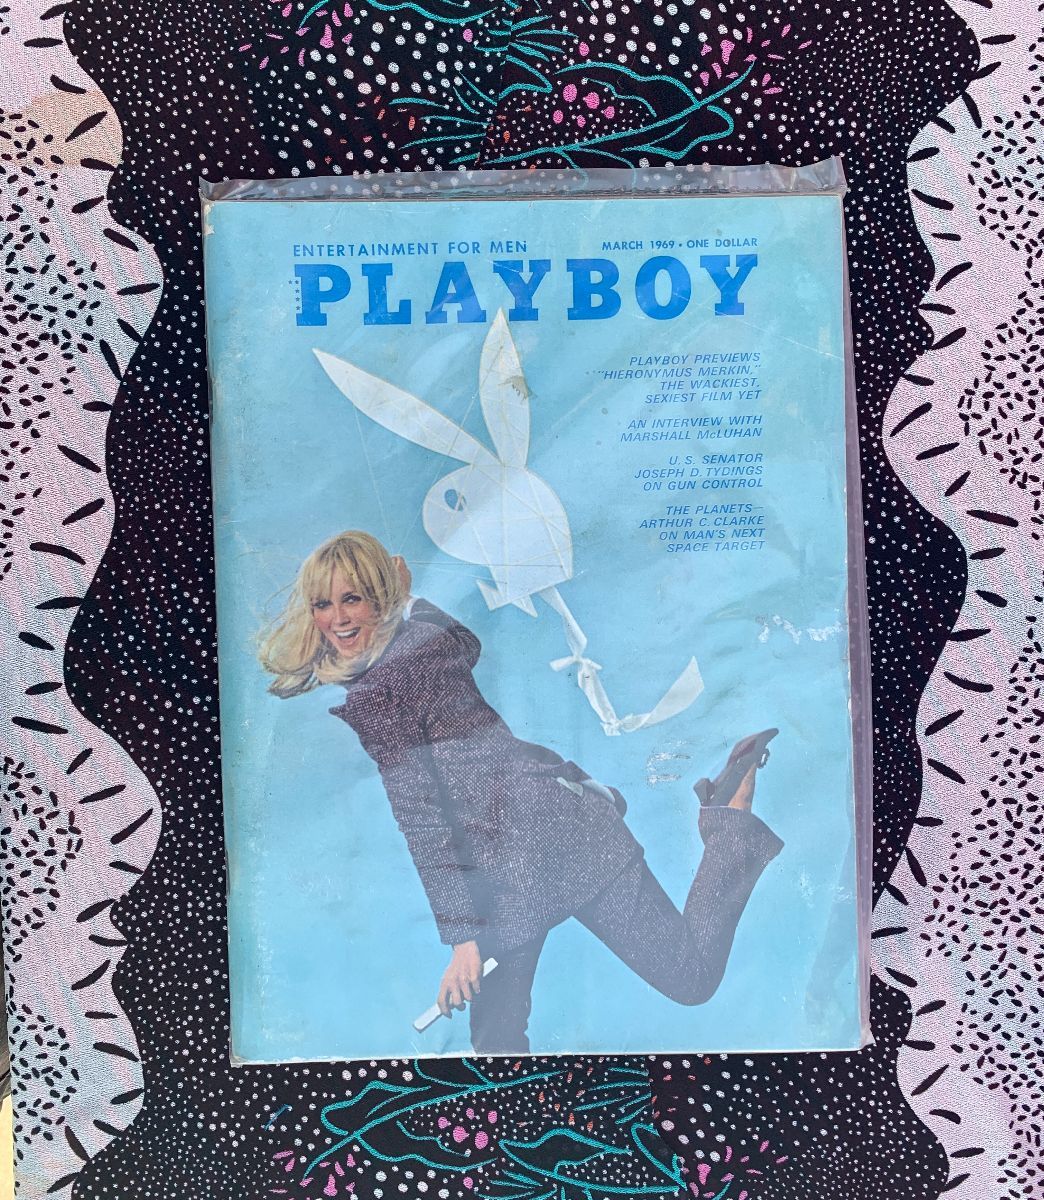 product details: PLAYBOY MAGAZINE |  MARCH 1969 |  PLAYBOY PREVIEWS photo